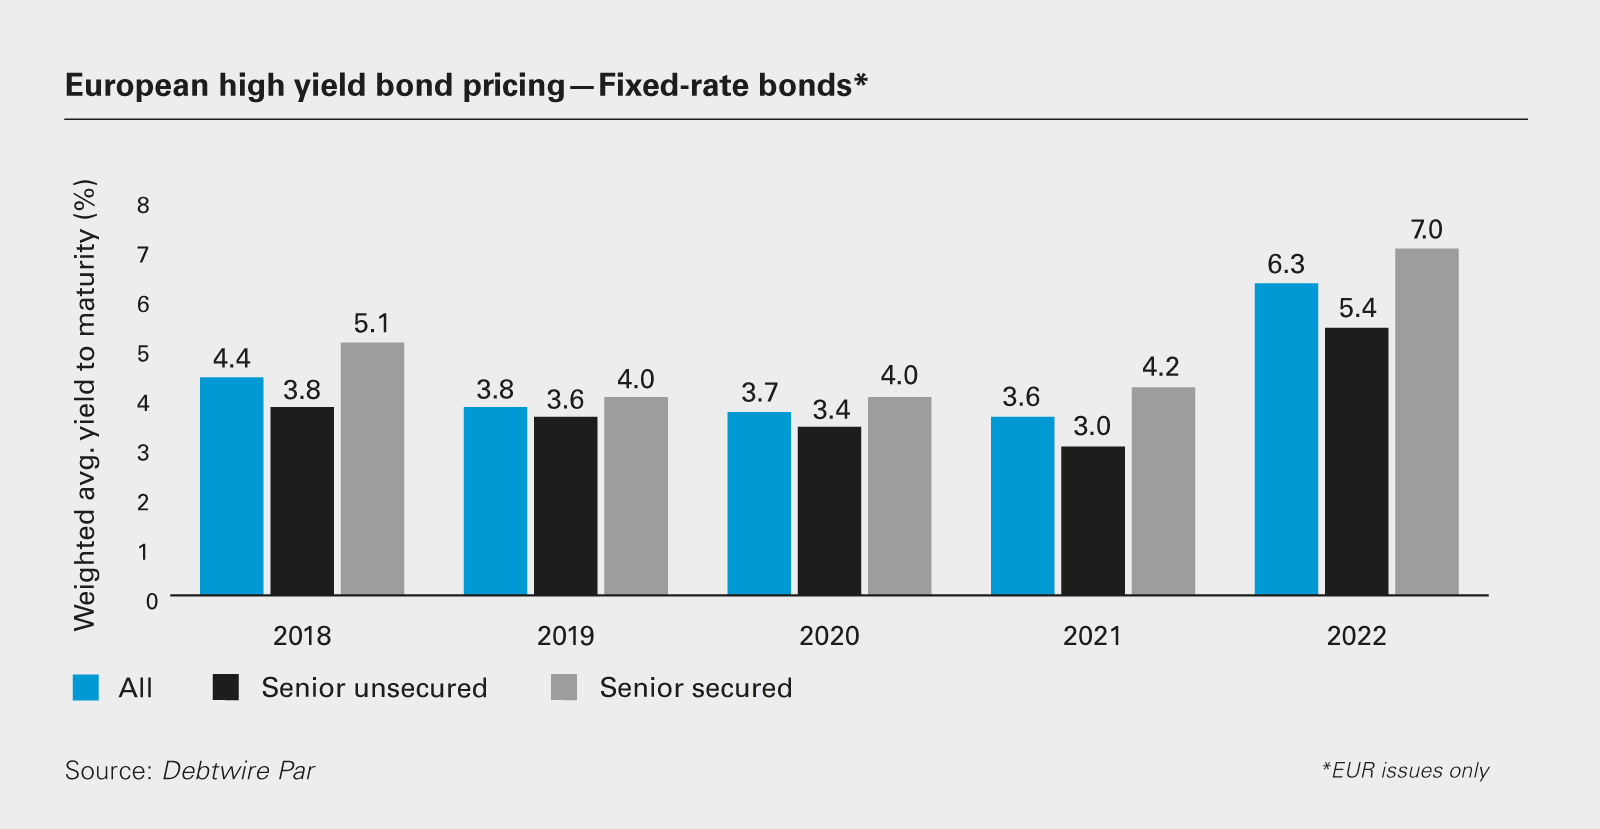 European high yield bond pricing—Fixed-rate bonds